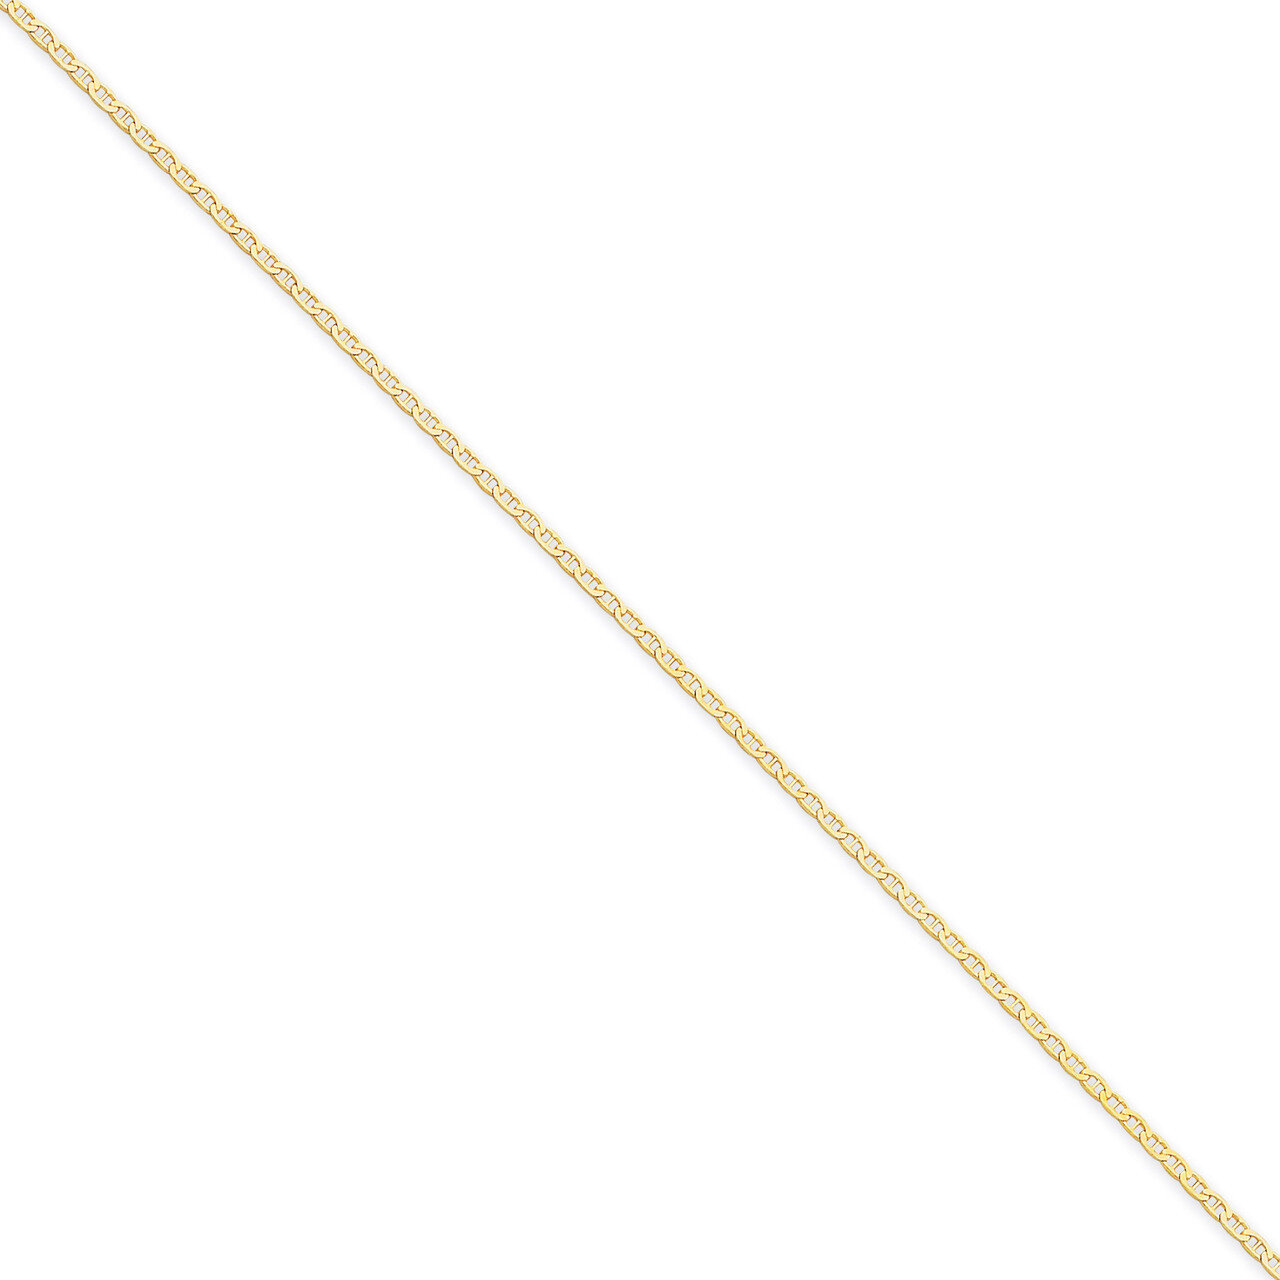 1.5mm Anchor Link Chain 24 Inch 14k Gold PEN50-24